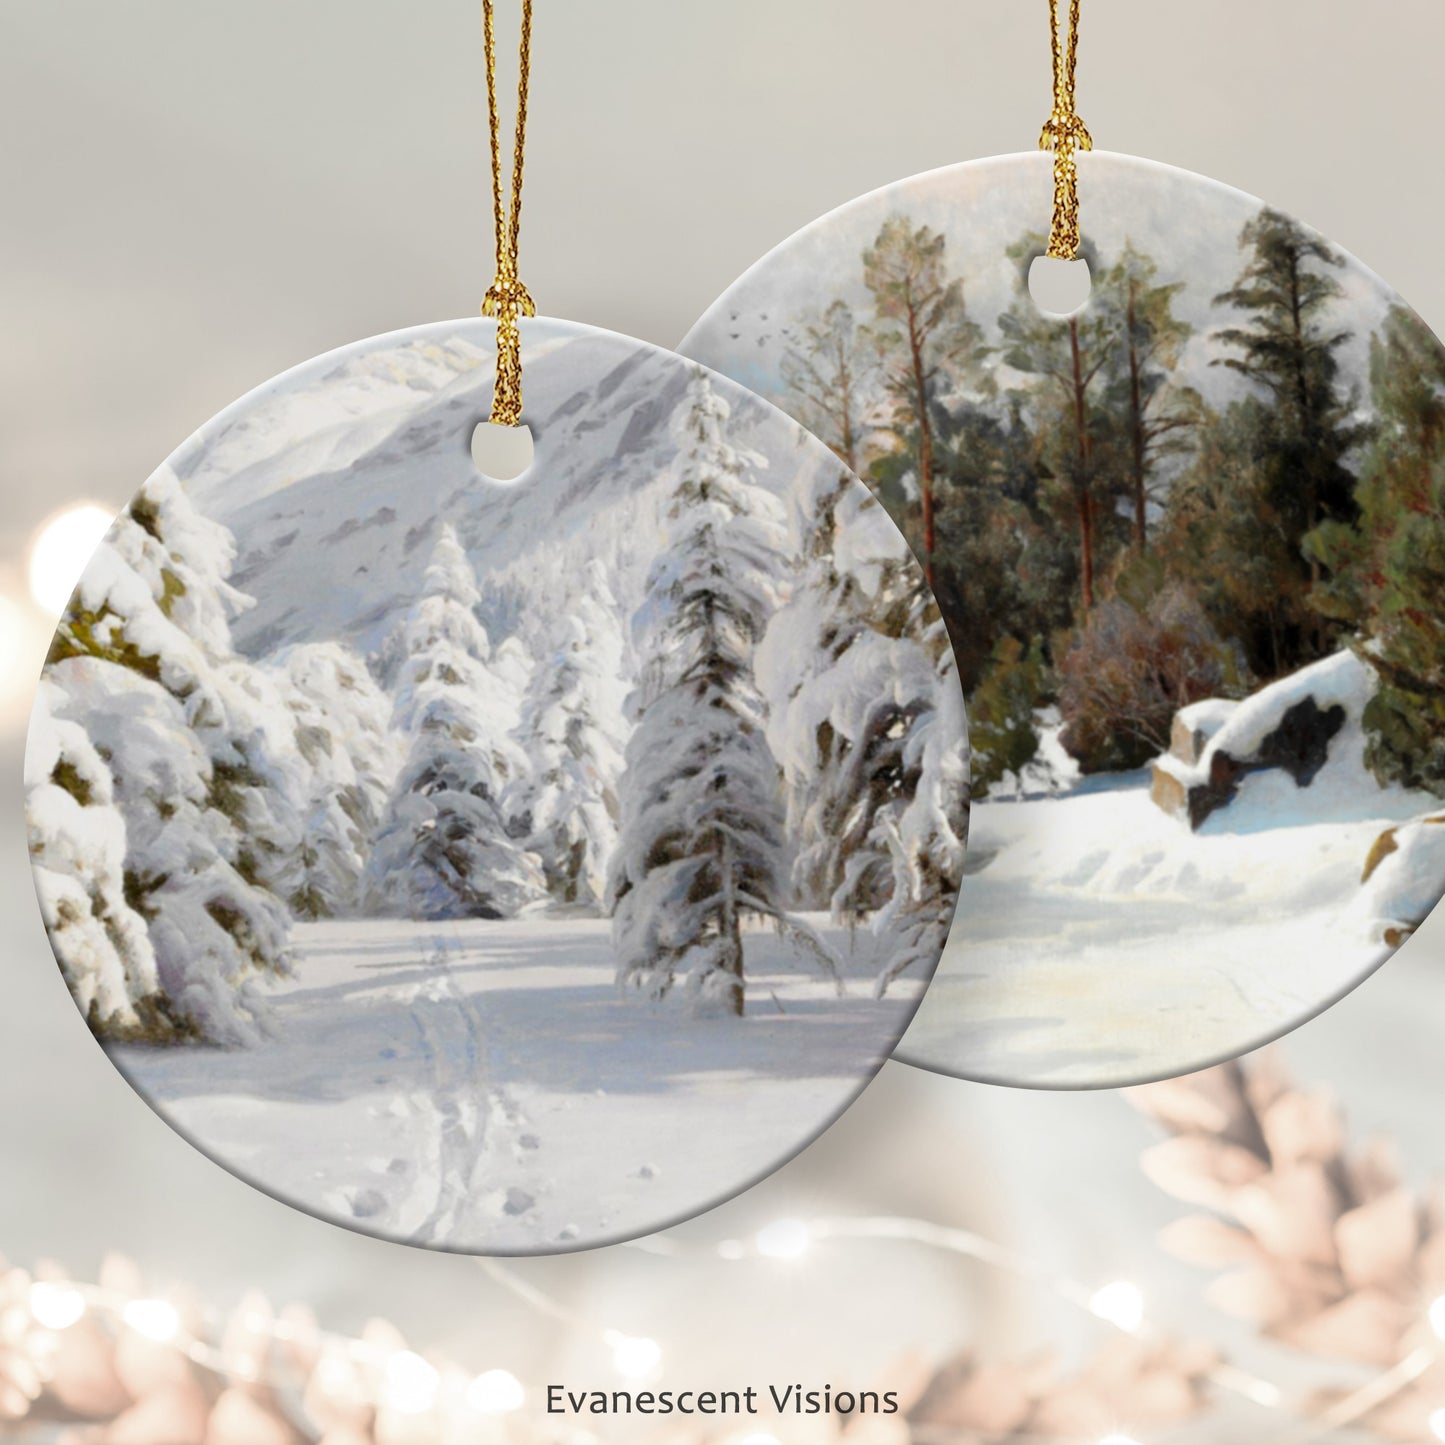 Ceramic Christmas Ornament with scenes of snowy winter landcapes